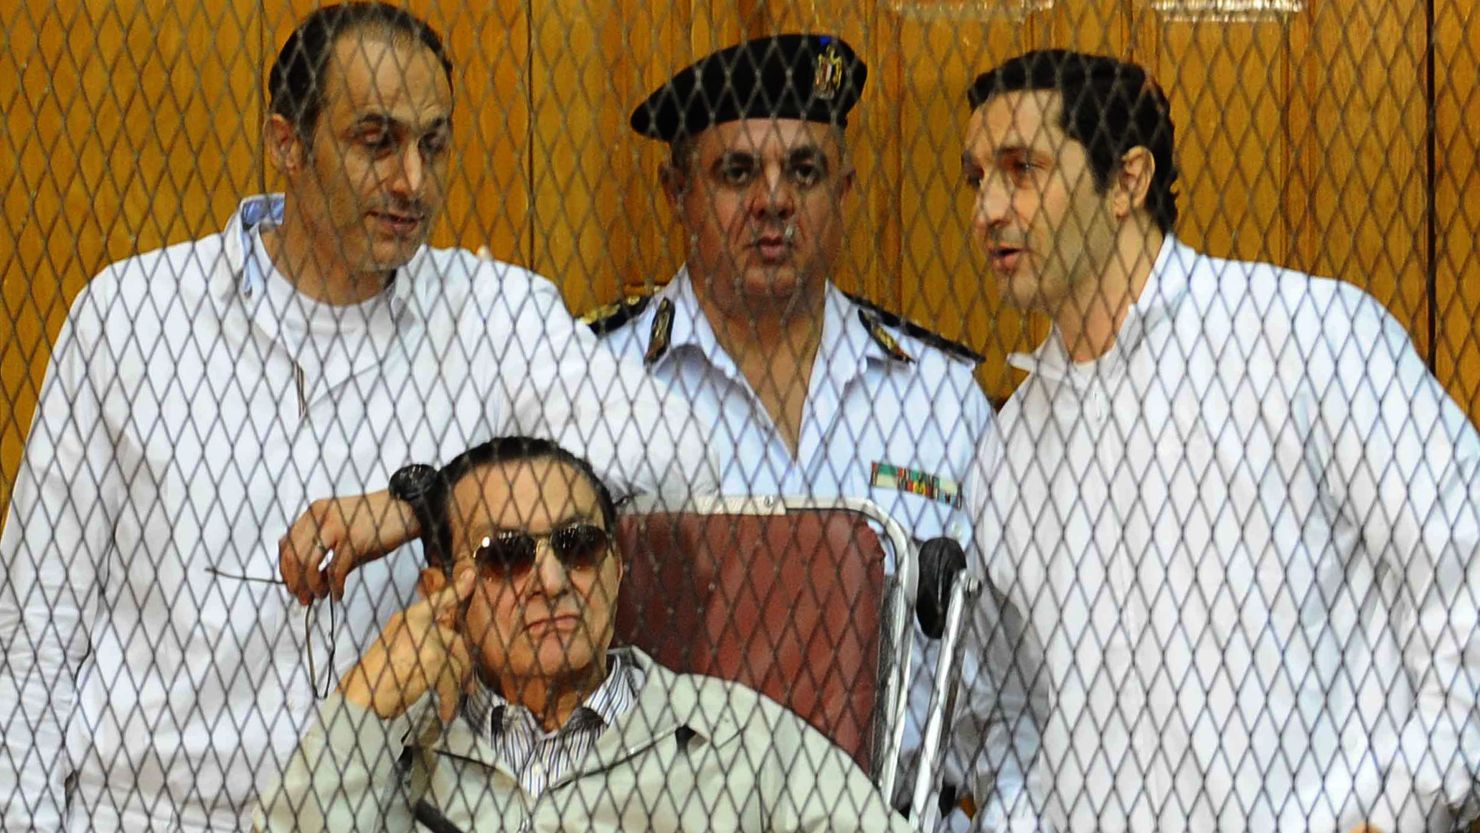 Former Egyptian president Hosni Mubarak and his sons Alaa (R) and Gamal at their trial in Cairo, September 14, 2013.